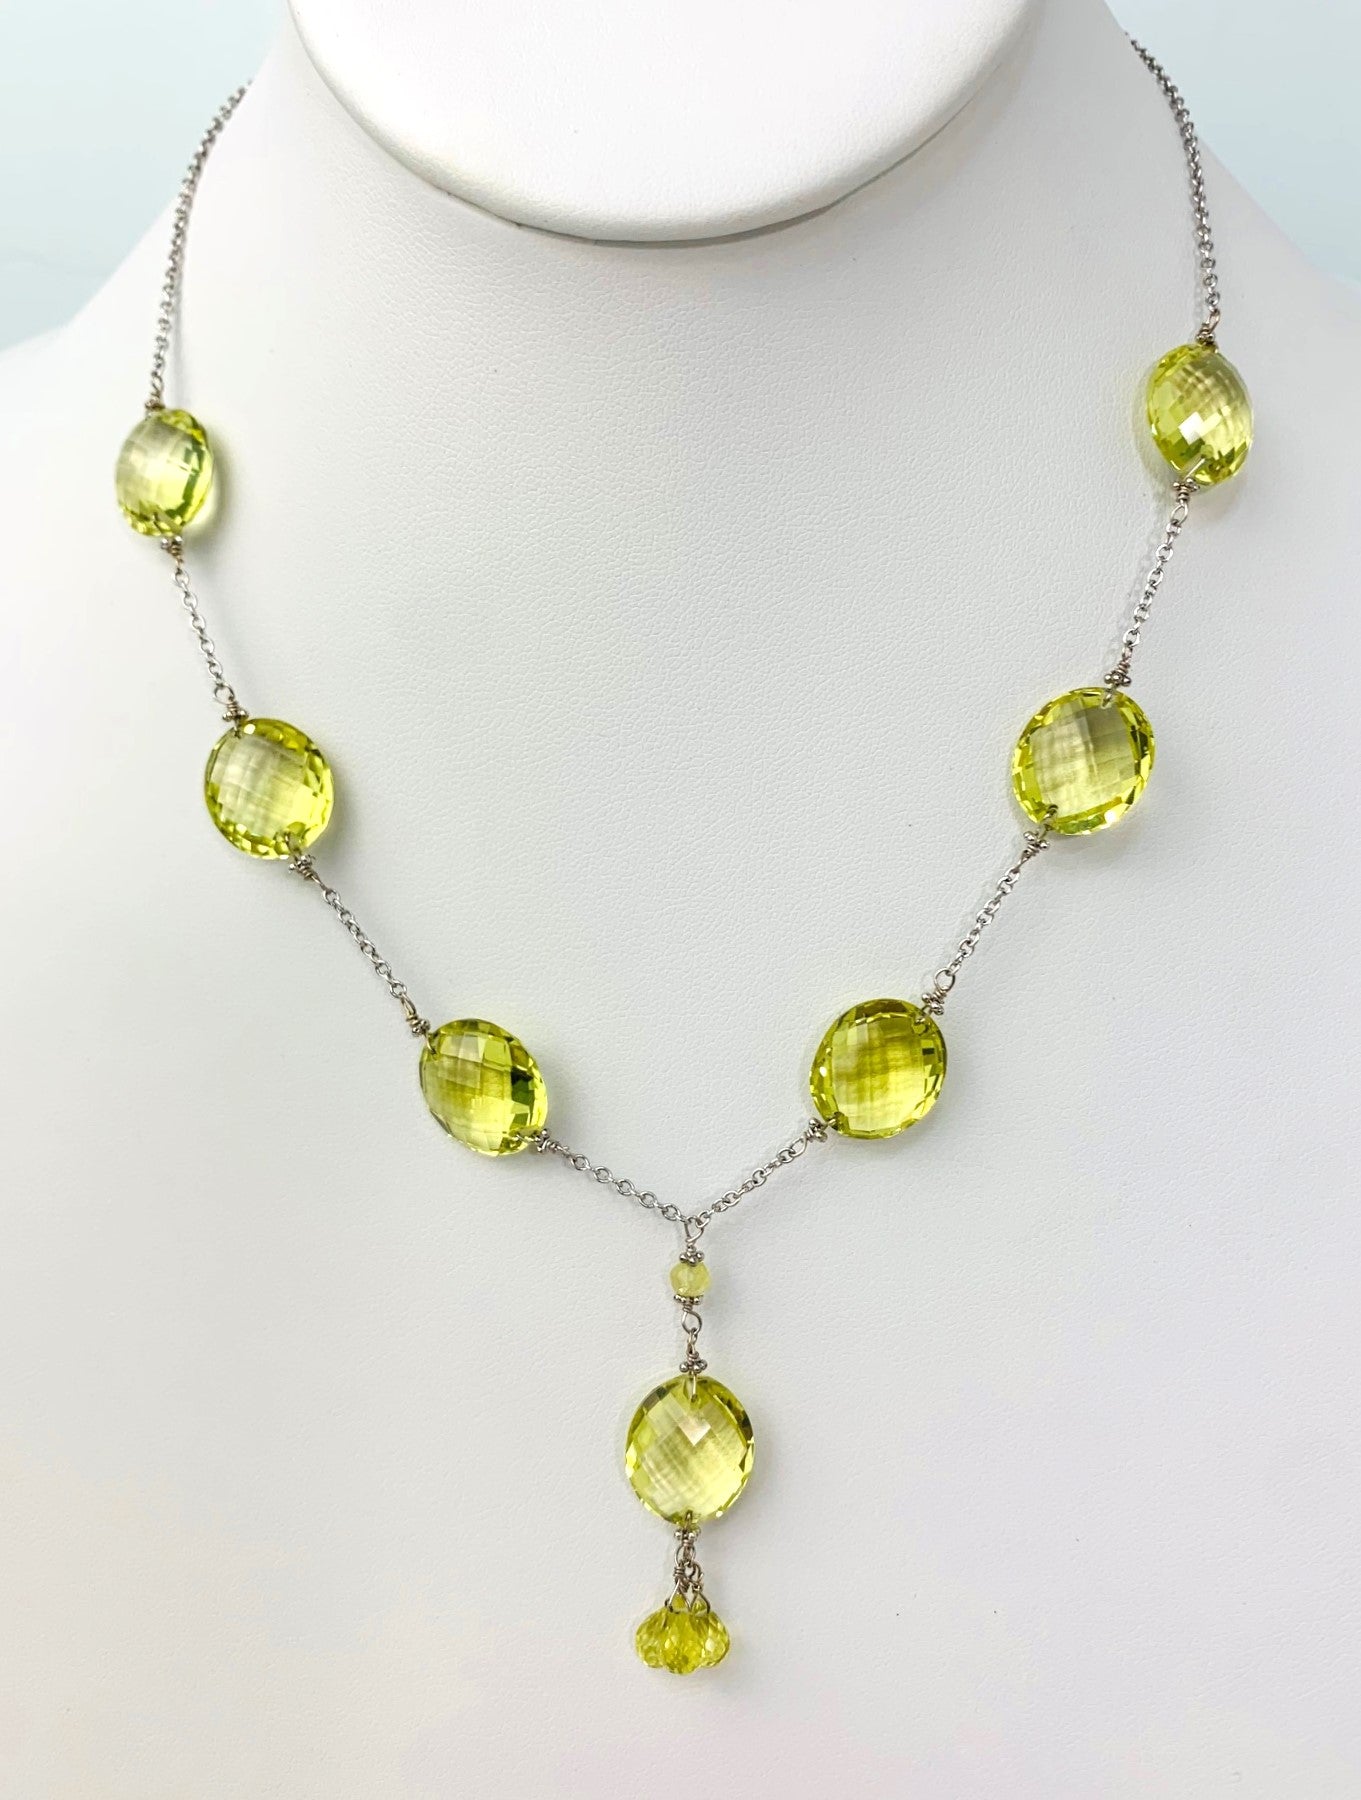 Clearance Sale! - 16-17" Lemon Quartz Station Necklace With Oval Checkerboard And 3 Briolette Tassel Drop in 14KW - NCK-370-TASTNCGM14W-LQ-17-SM